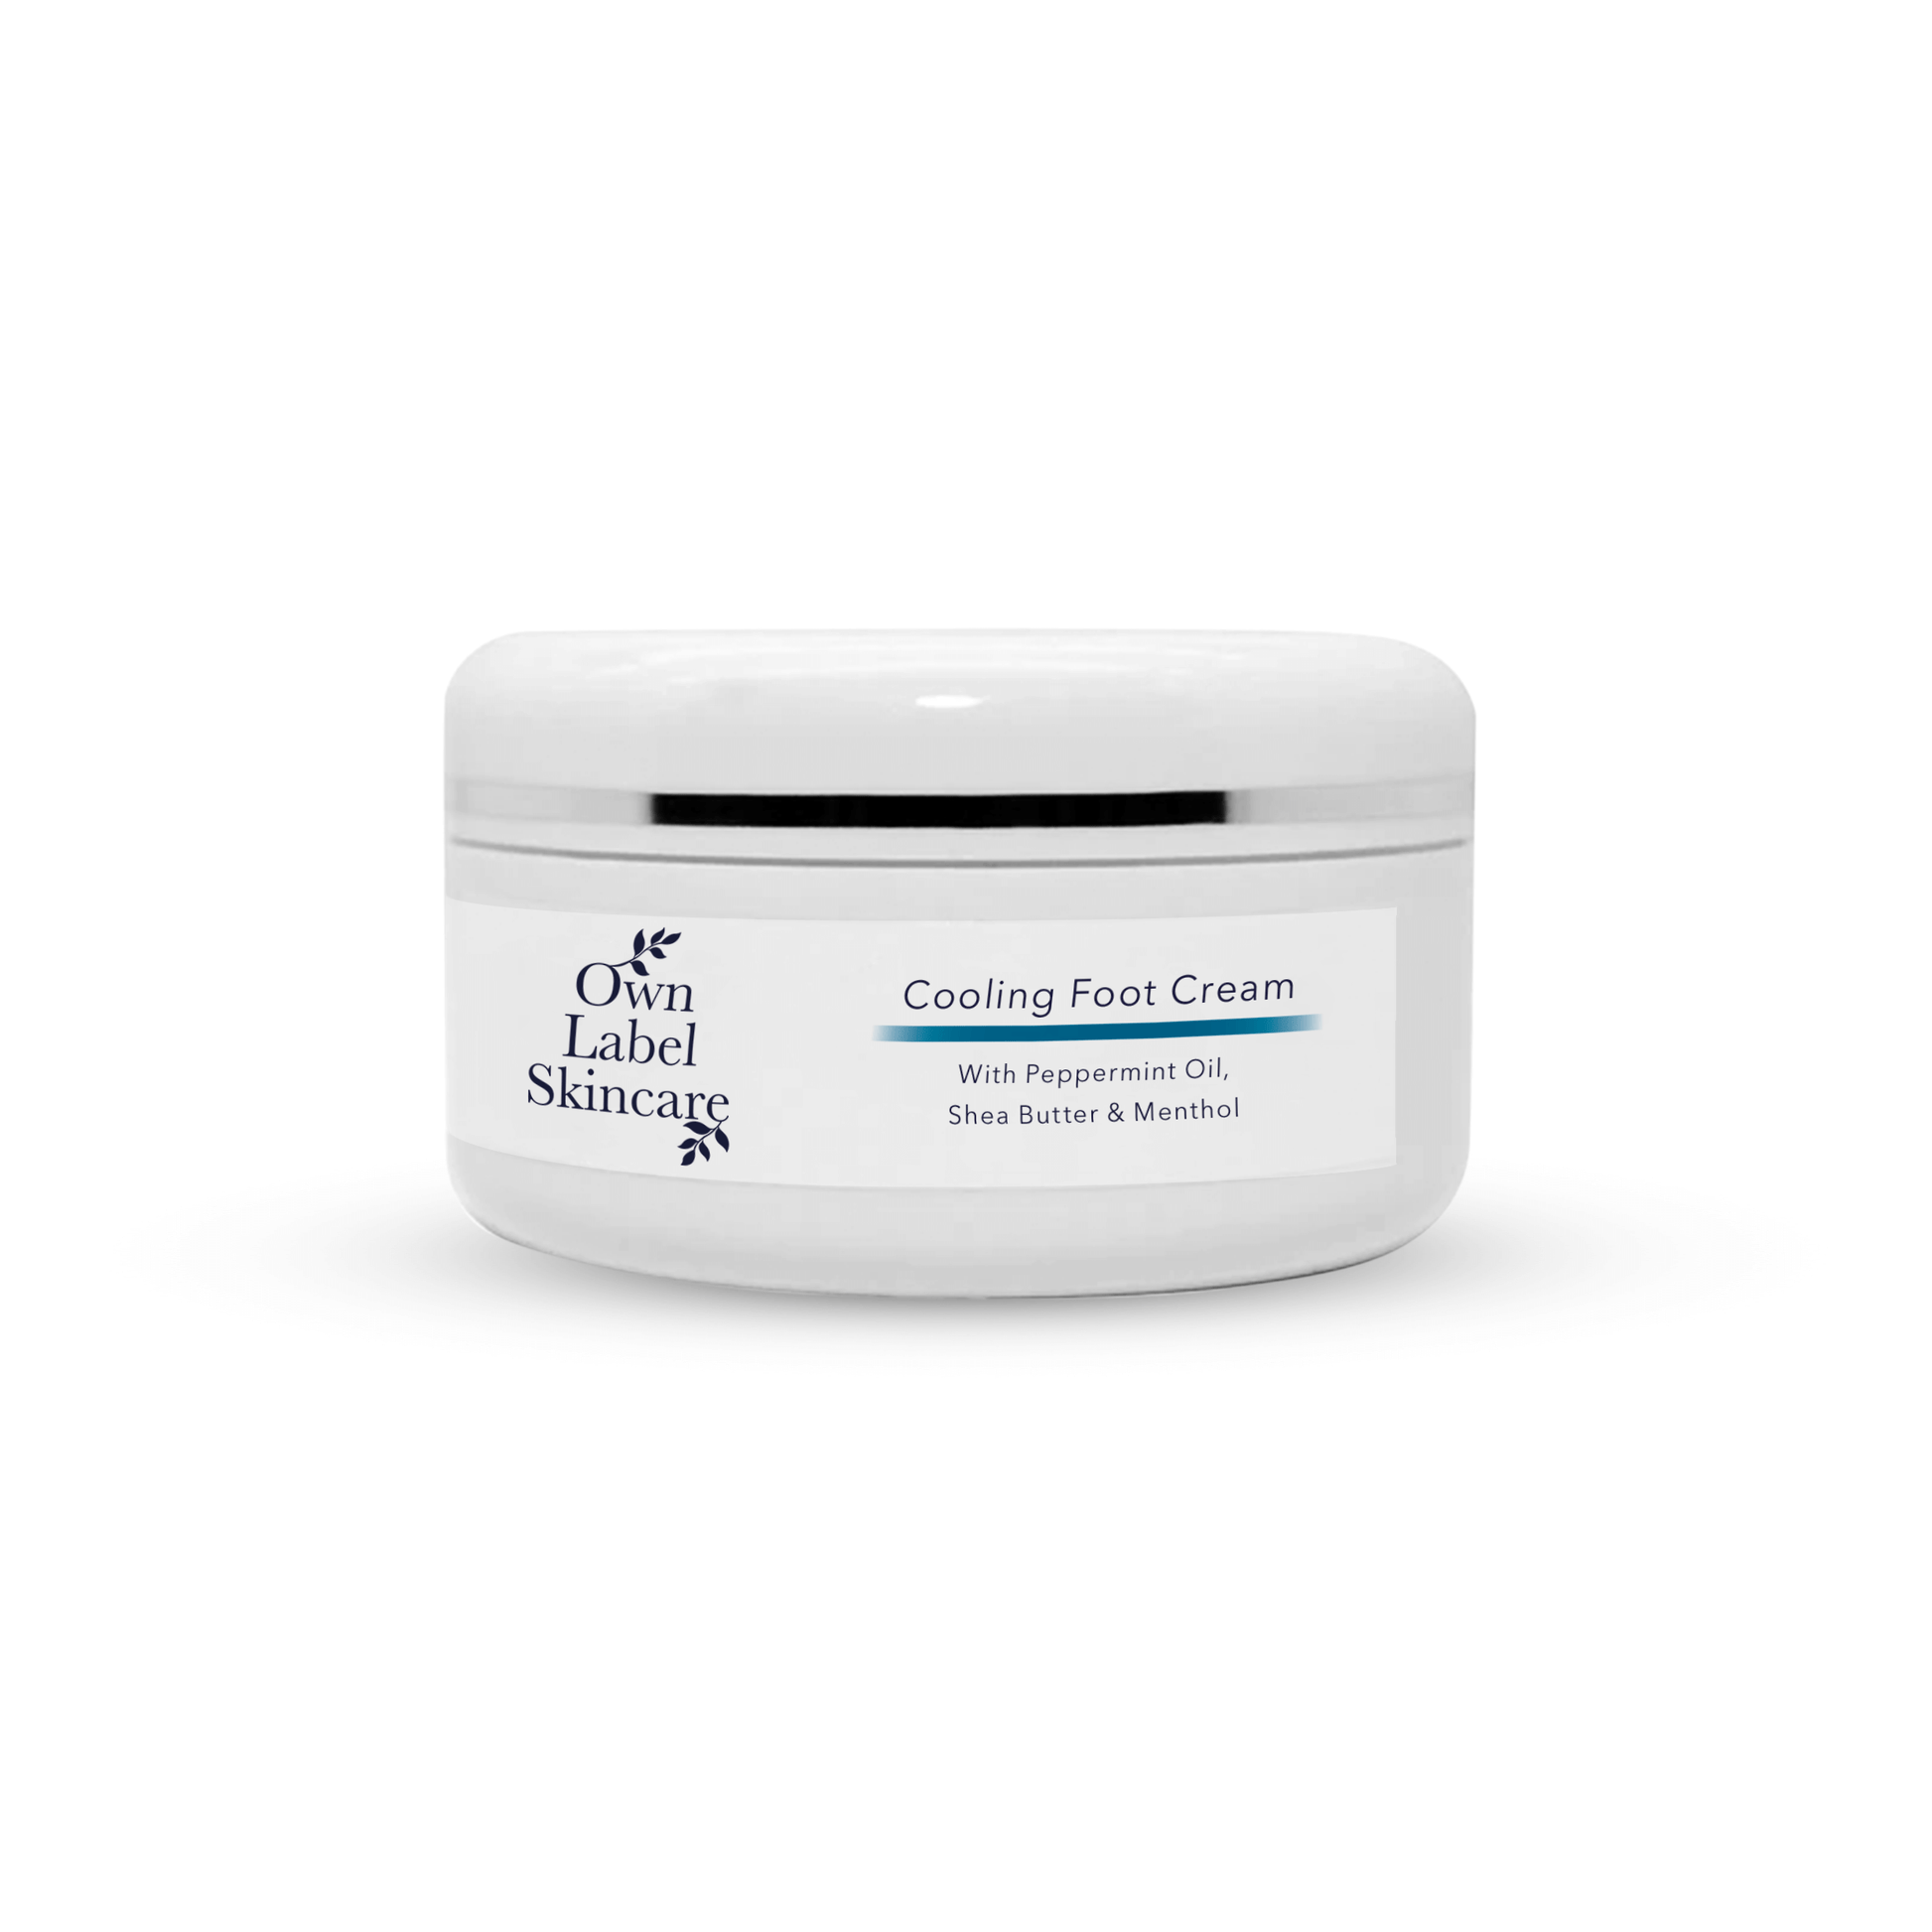 Own Label Skincare Vegan Cooling Foot Cream with Peppermint & Shea Butter